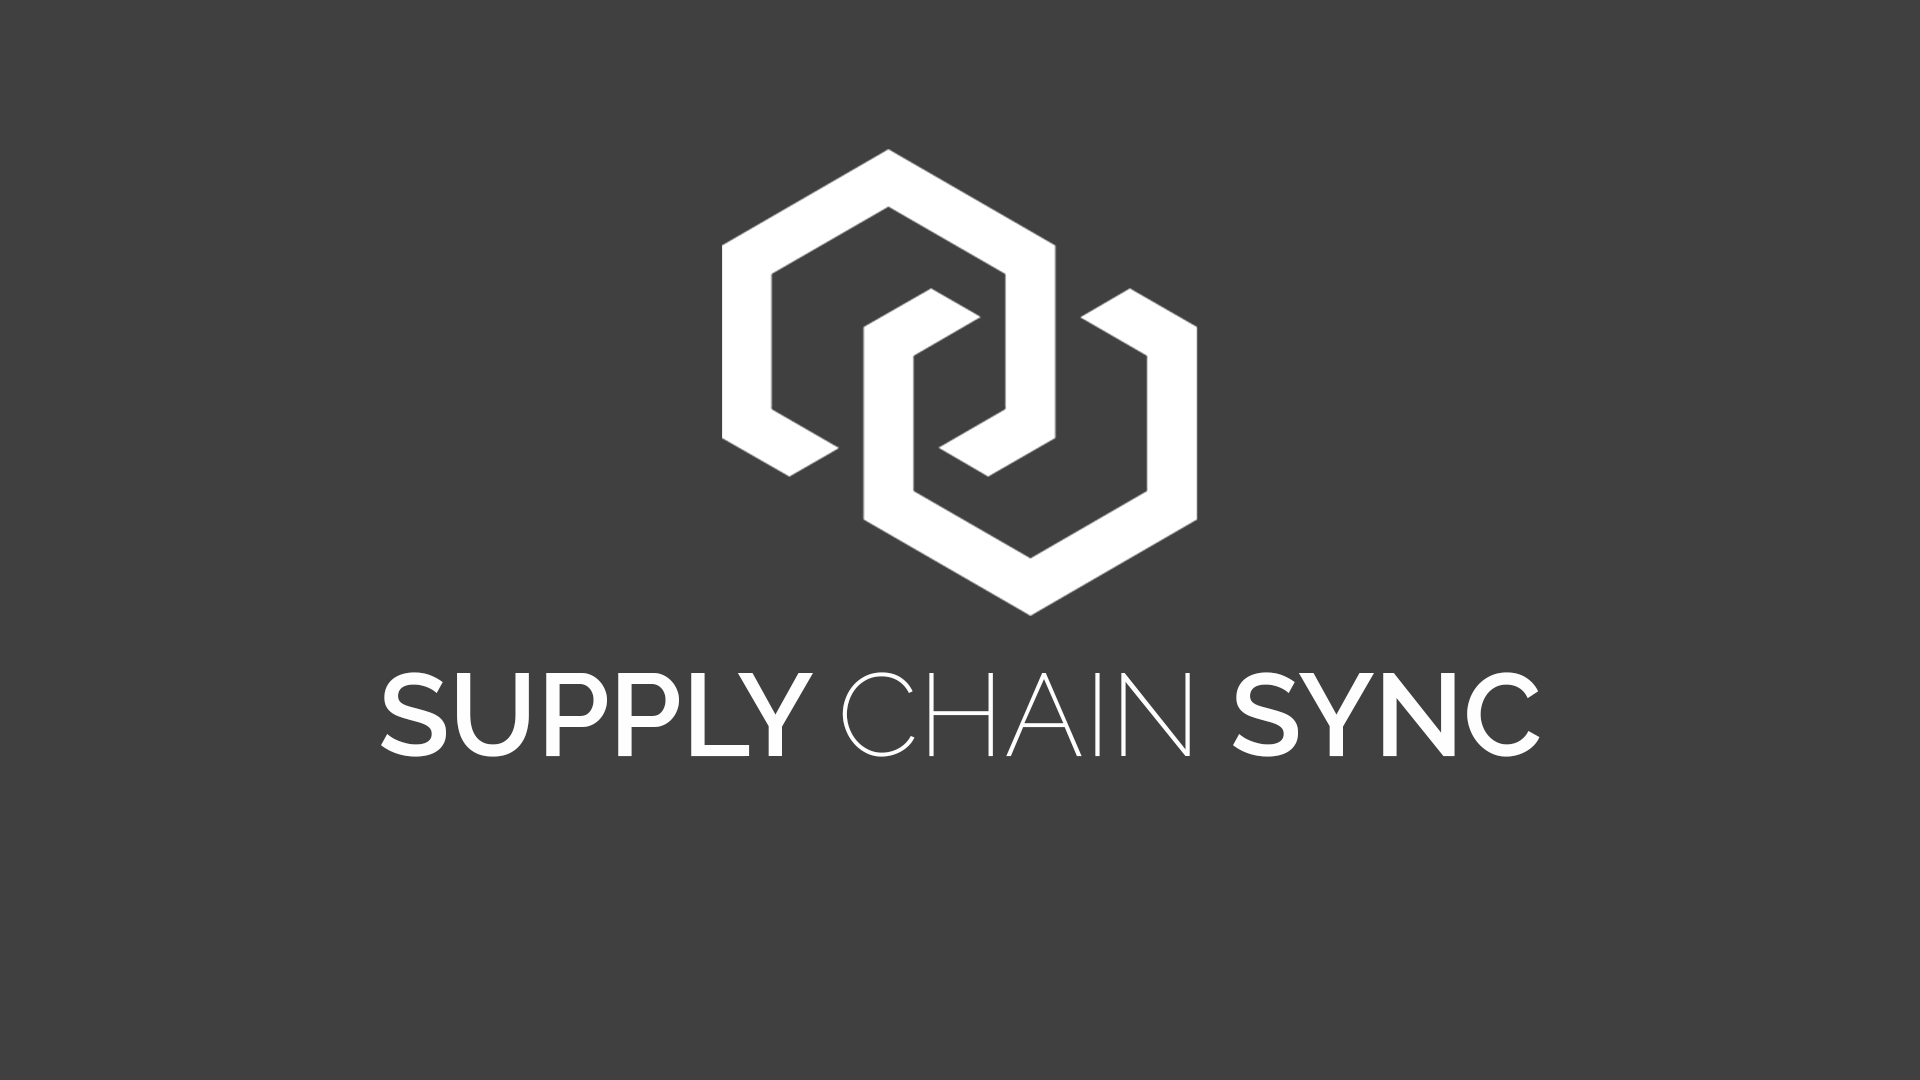 End-To-End Supply Chain Management